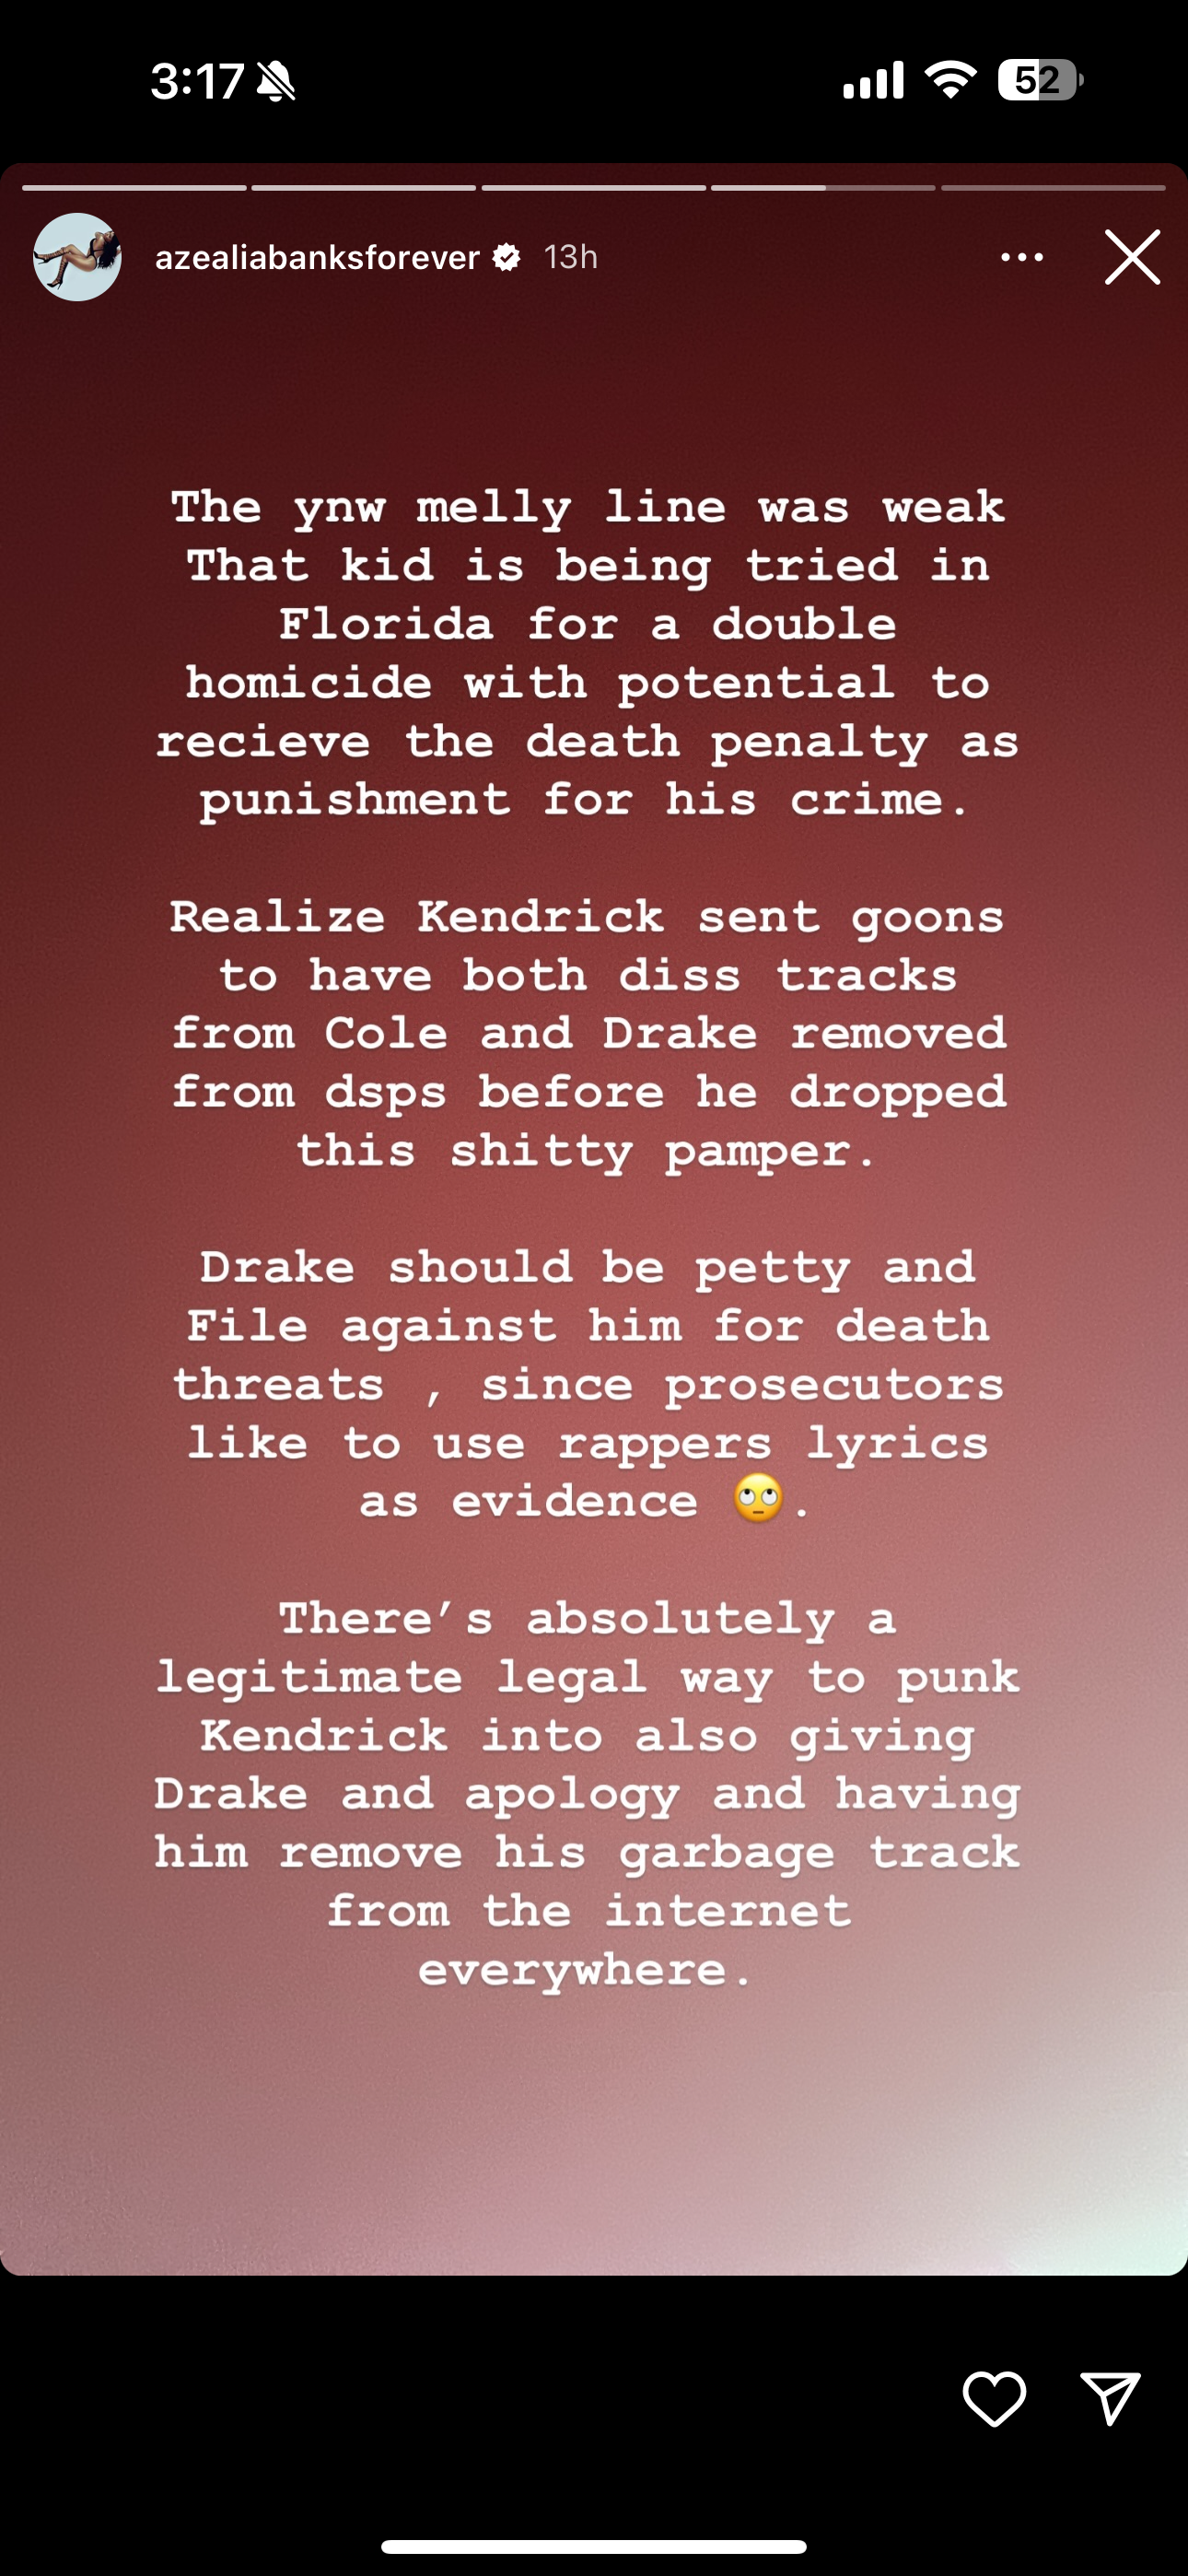 Summarized text from a social media post discussing legal issues related to a musician named Azealia Banks